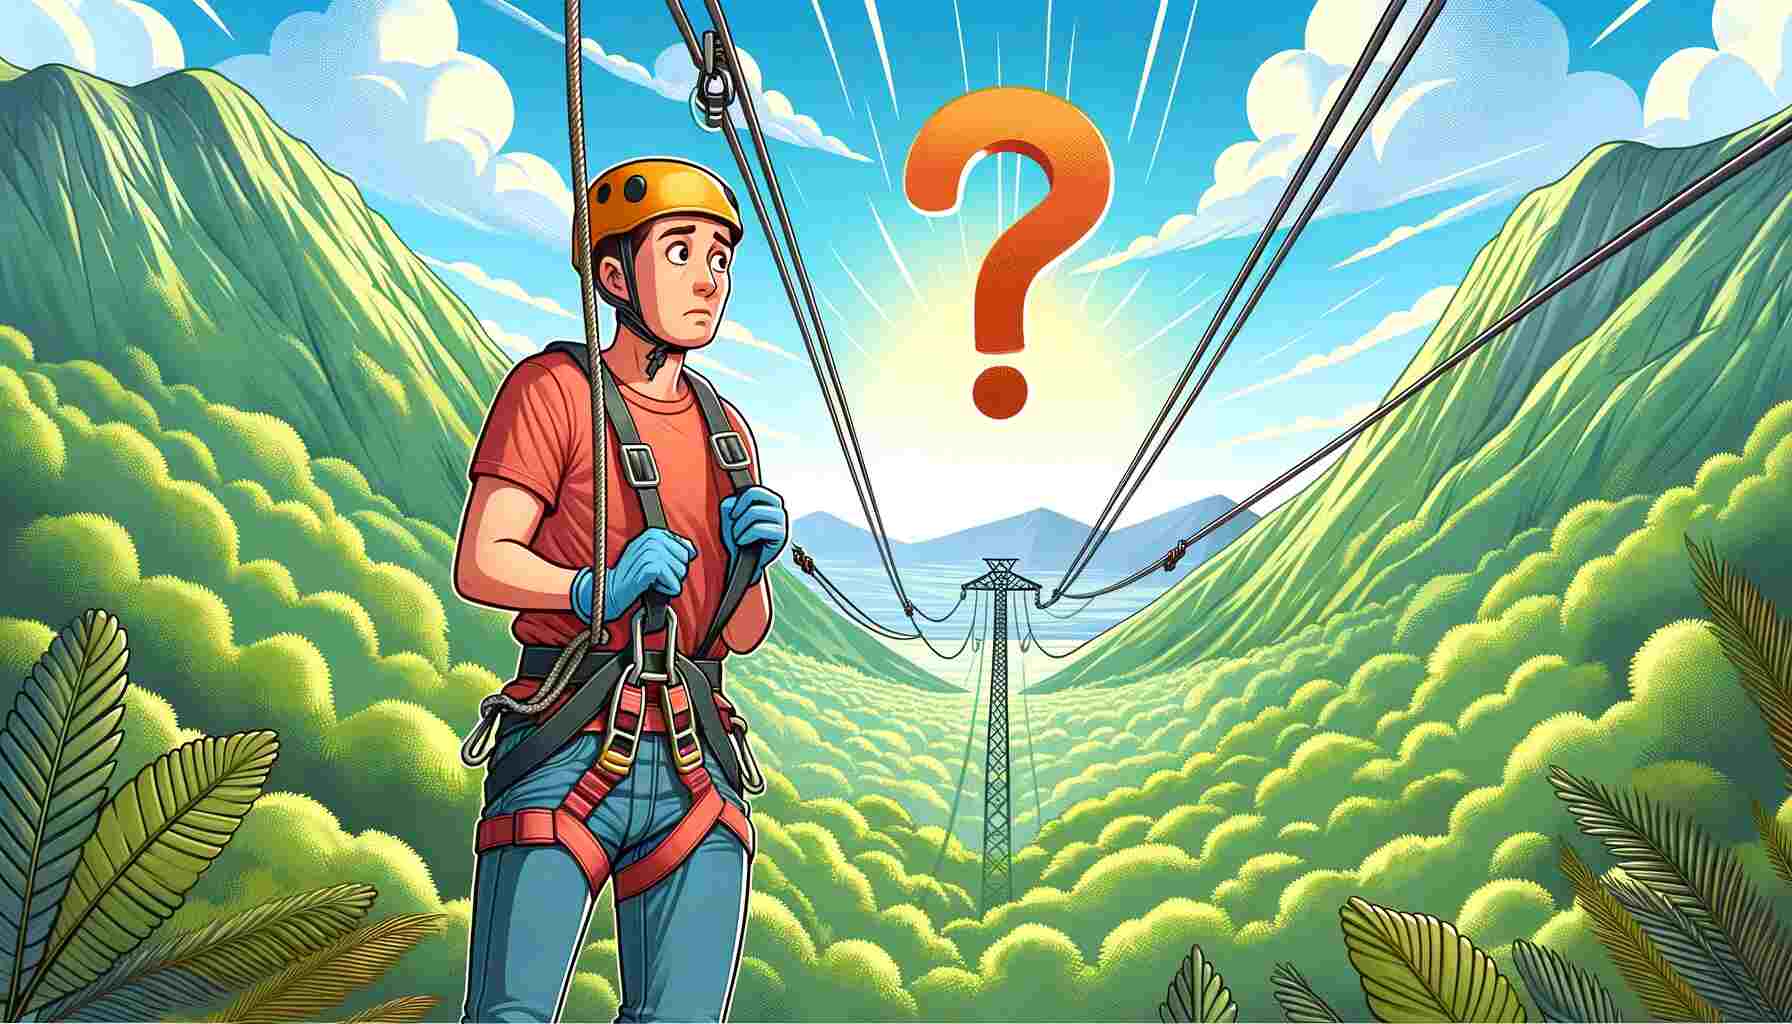 Is Ziplining Dangerous What You Need to Know Before Trying It